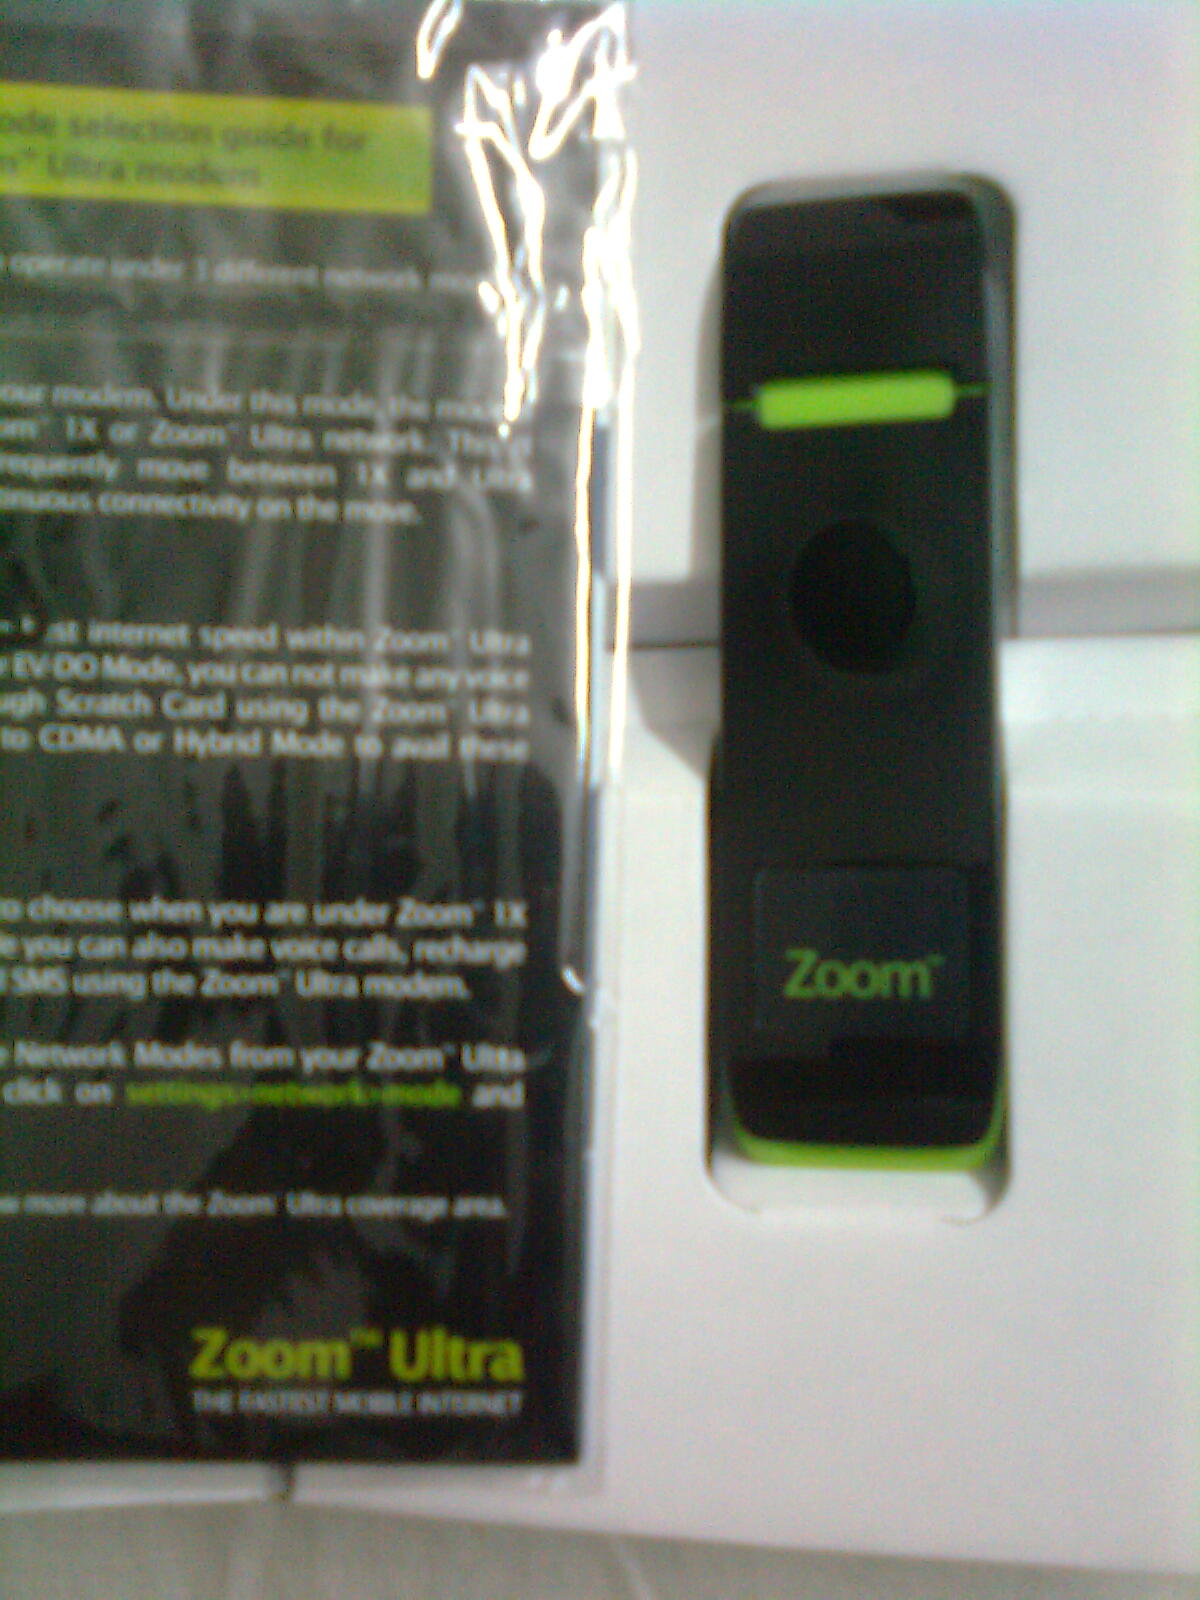 Zoom Ultra USB Modem - urgent sell in lowest price large image 0